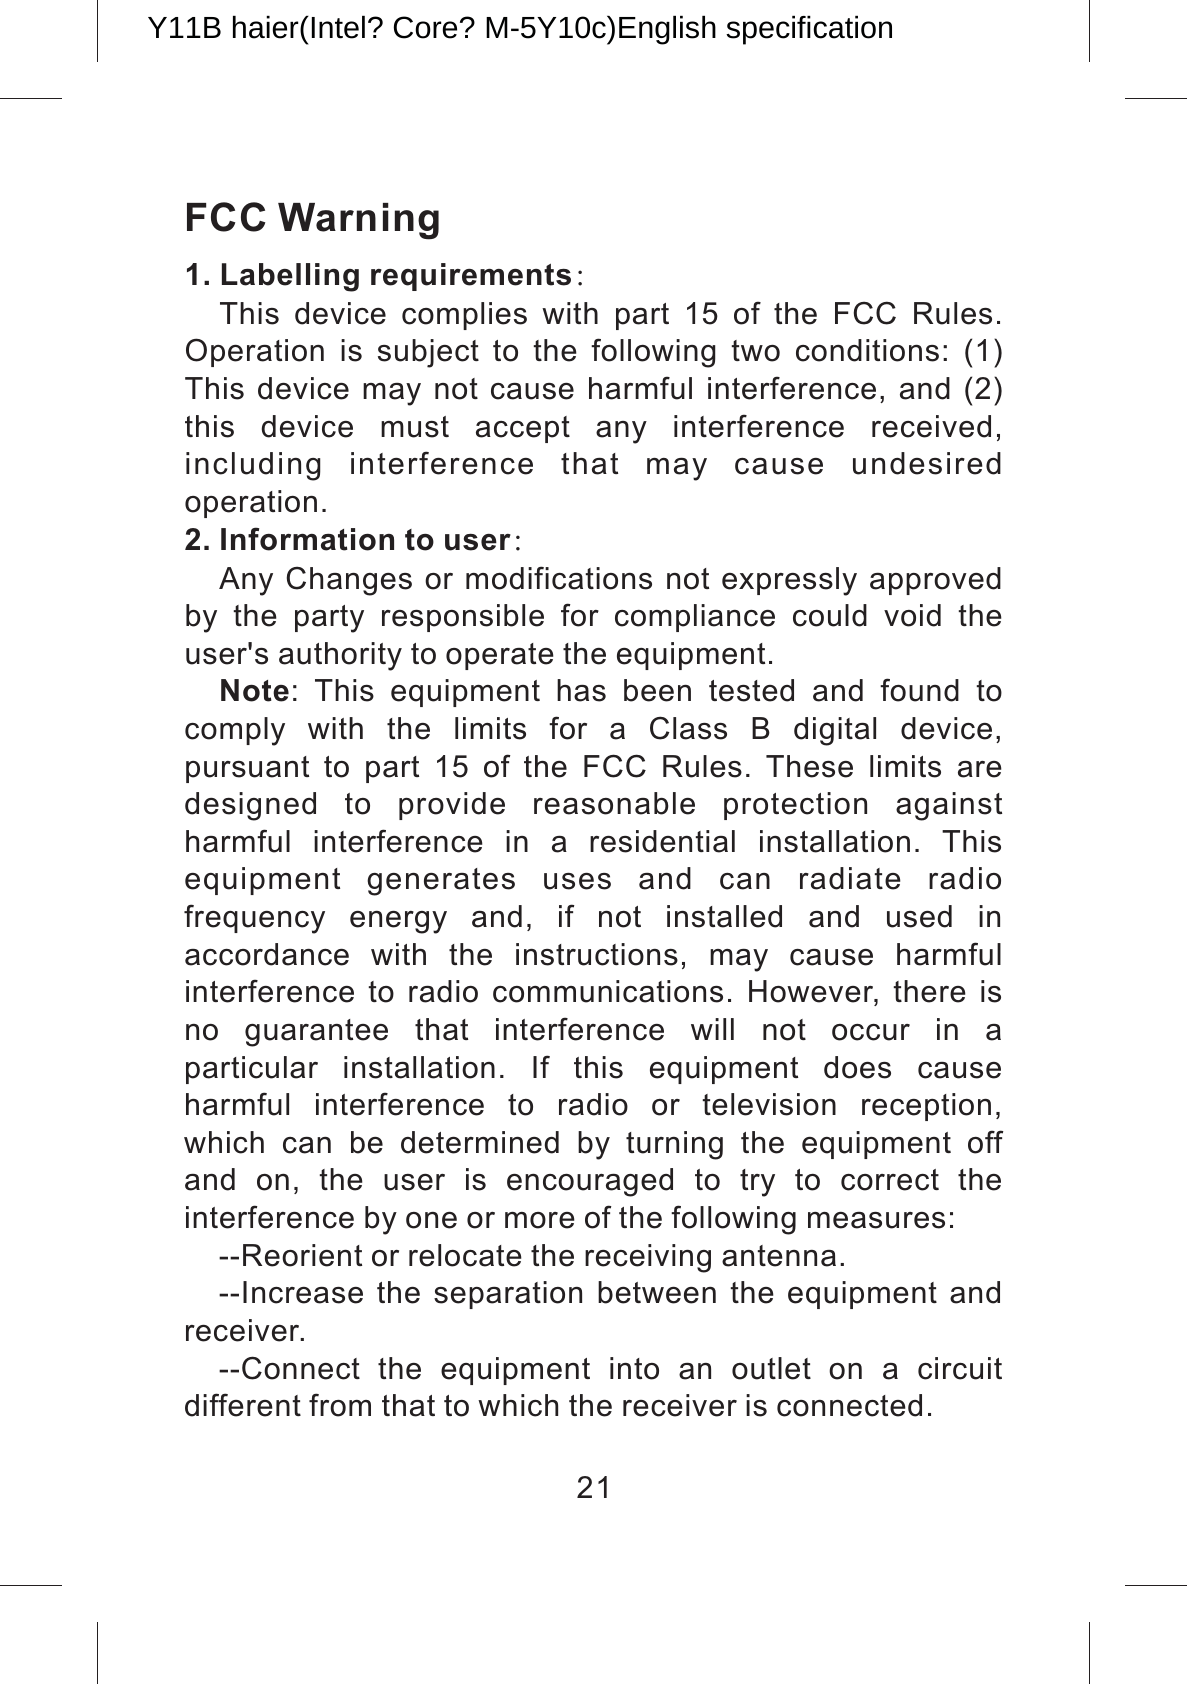 FCC Warning1. Labelling requirements：This  device  complies  with  part  15  of  the  FCC  Rules. Operation  is  subject  to  the  following  two  conditions:  (1) This device may not cause harmful interference, and (2) this  device  must  accept  any  interference  received, including  interference  that  may  cause  undesired operation.2. Information to user：Any Changes or modifications not expressly approved by  the  party  responsible  for  compliance  could  void  the user&apos;s authority to operate the equipment.Note:  This  equipment  has  been  tested  and  found  to comply  with  the  limits  for  a  Class  B  digital  device, pursuant  to  part  15  of  the  FCC  Rules.  These  limits  are designed  to  provide  reasonable  protection  against harmful  interference  in  a  residential  installation.  This equipment  generates  uses  and  can  radiate  radio frequency  energy  and,  if  not  installed  and  used  in accordance  with  the  instructions,  may  cause  harmful interference  to  radio communications.  However, there is no  guarantee  that  interference  will  not  occur  in  a particular  installation.  If  this  equipment  does  cause harmful  interference  to  radio  or  television  reception, which  can  be  determined  by  turning  the  equipment  off and  on,  the  user  is  encouraged  to  try  to  correct  the interference by one or more of the following measures:--Reorient or relocate the receiving antenna.--Increase the separation between the  equipment and receiver.--Connect  the  equipment  into  an  outlet  on  a  circuit different from that to which the receiver is connected.21Y11B haier(Intel? Core? M-5Y10c)English specification 